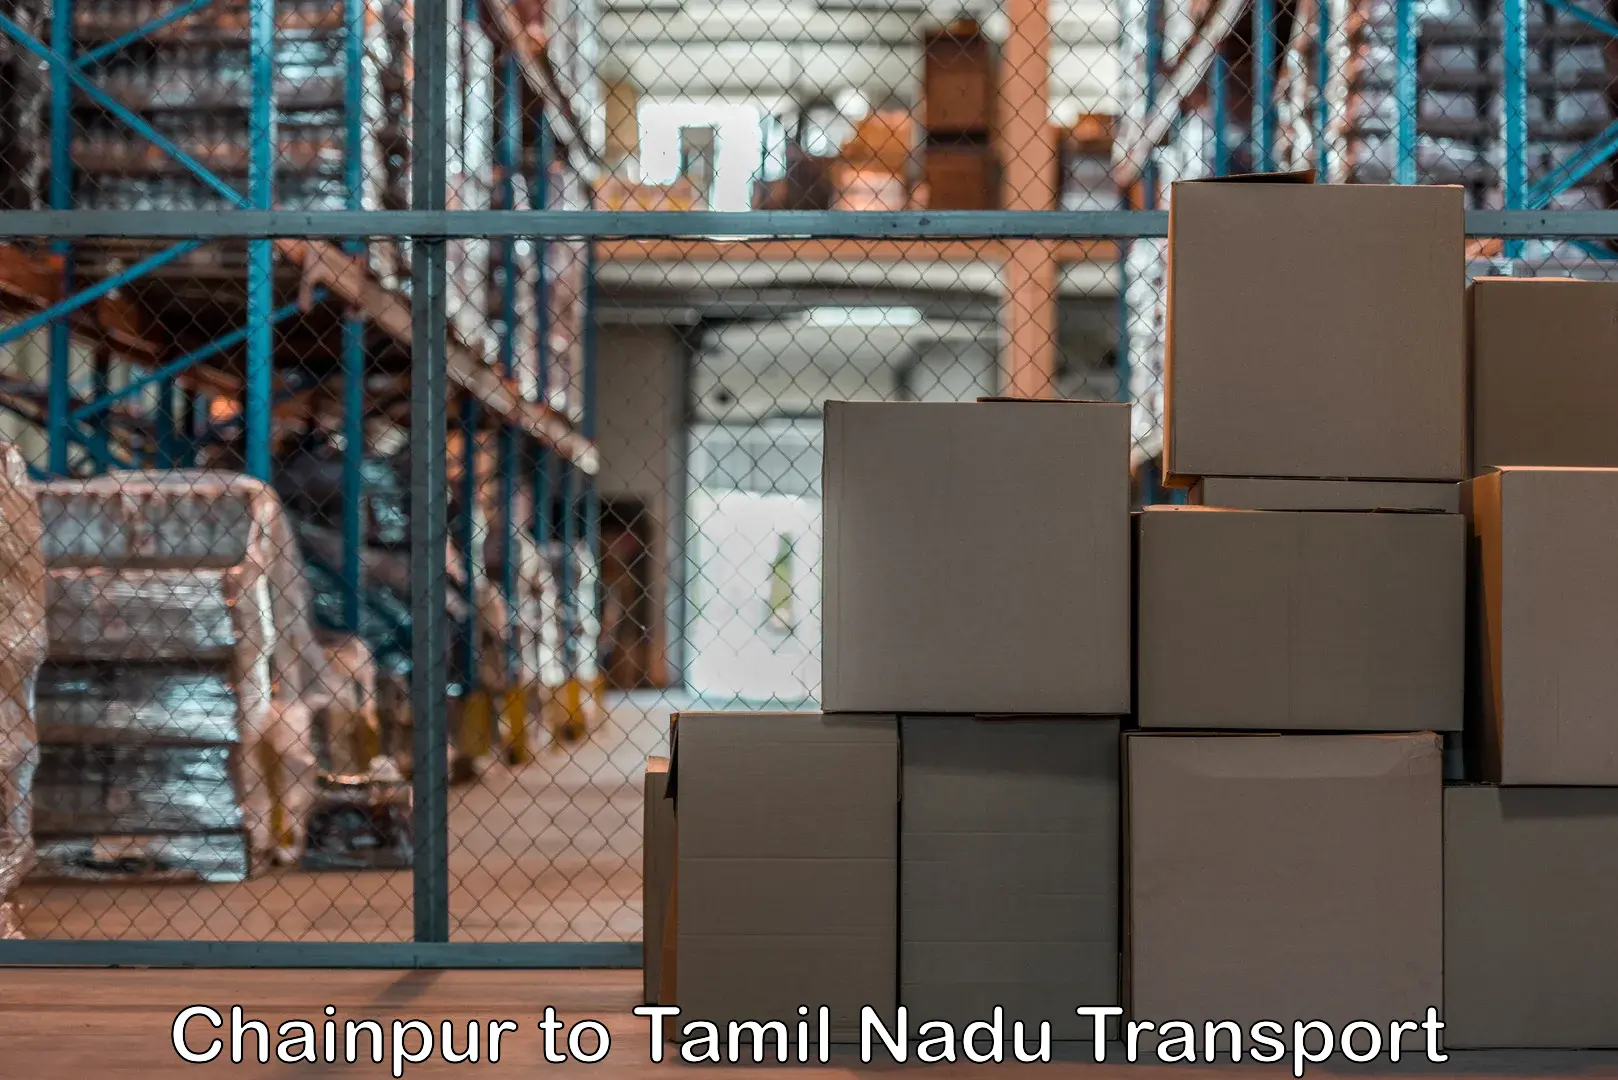 Goods delivery service Chainpur to Thiruthuraipoondi